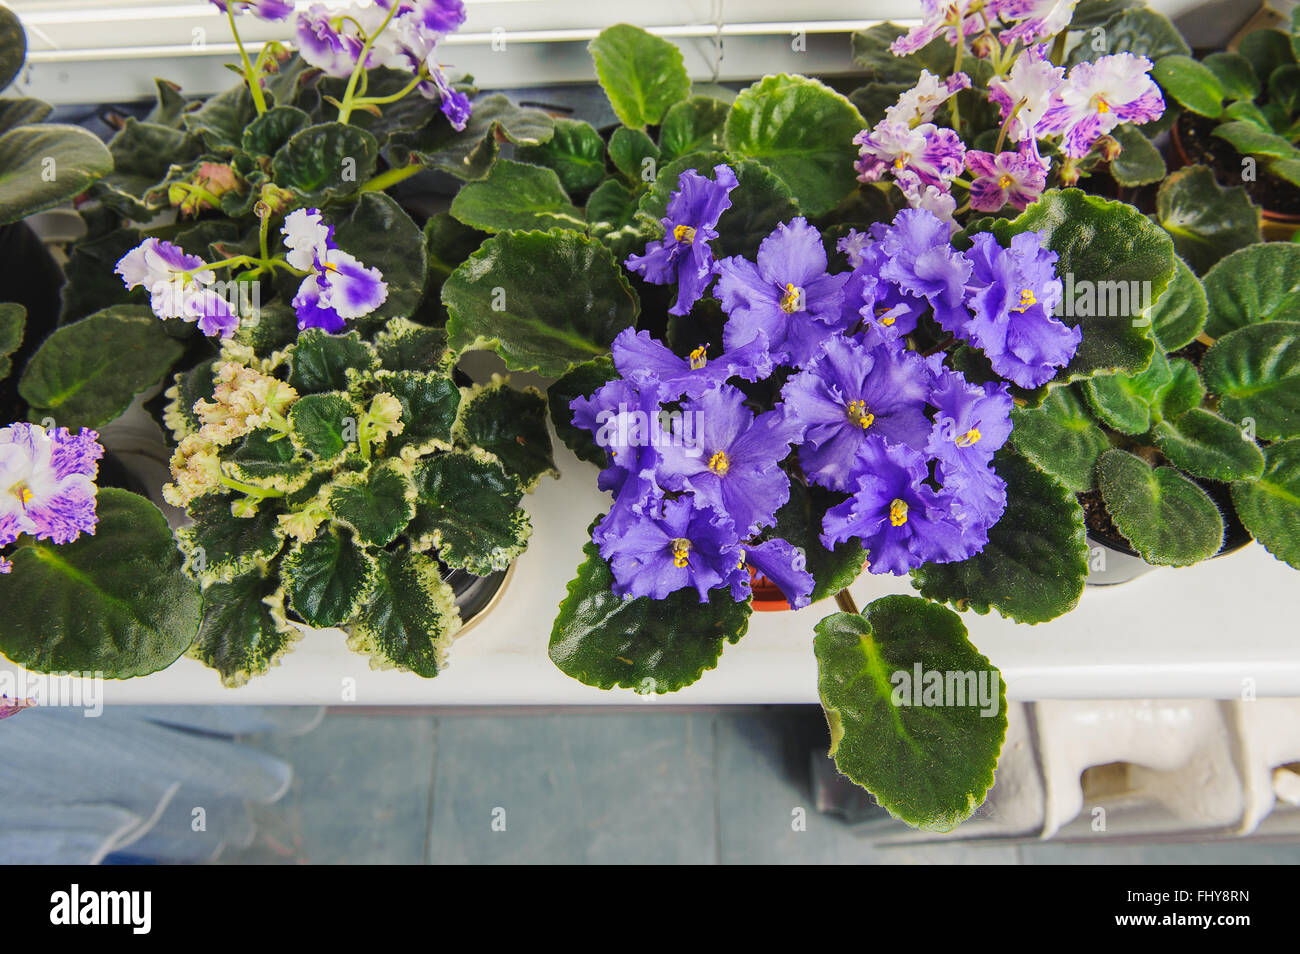 African Violet or Saintpaulia on the background of window with jalousie, shutter, houseplants. view from above. Stock Photo